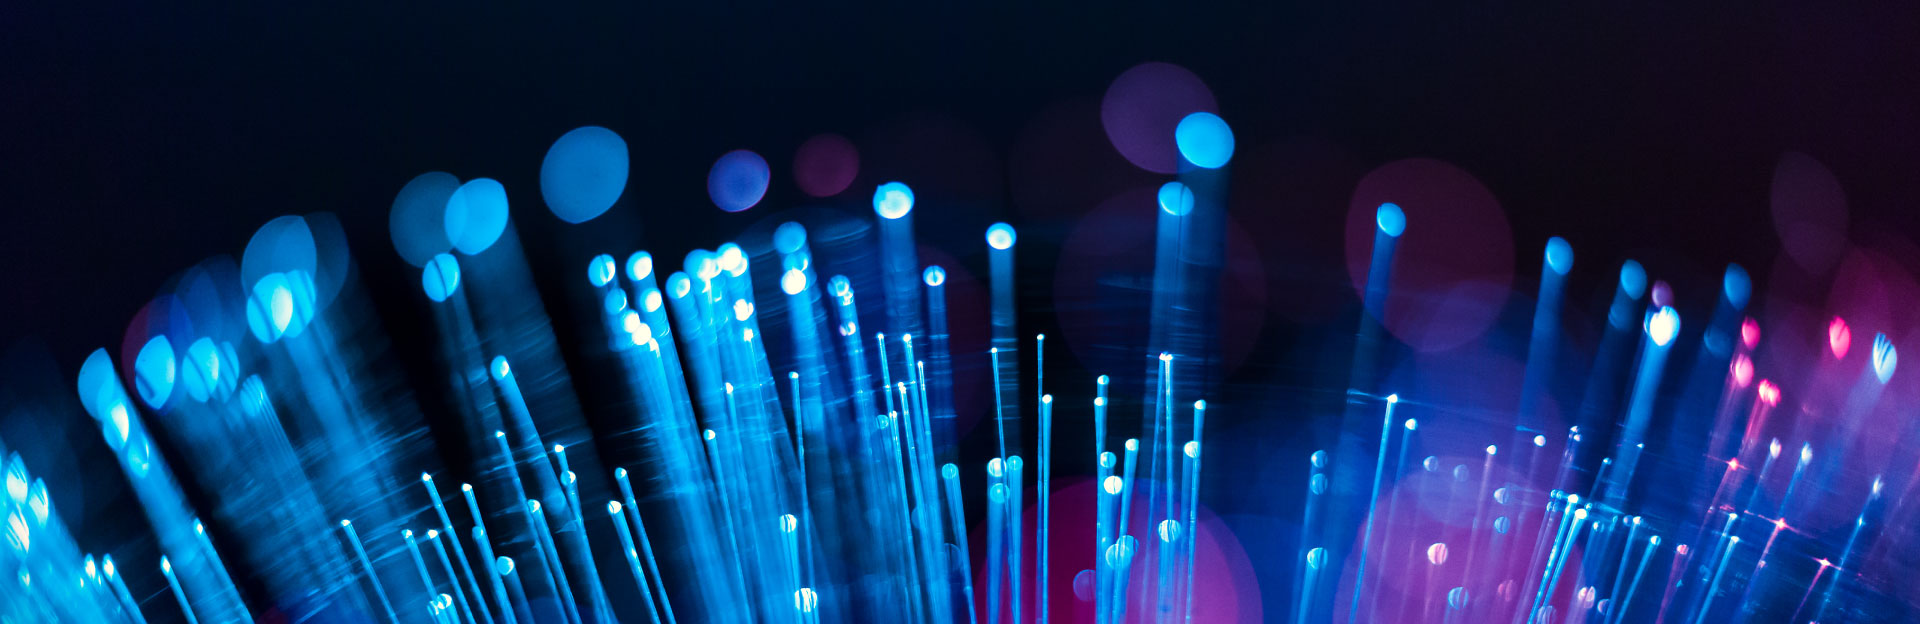 Rutgers University Connects with Edge on Their 100 Gbps Optical Fiber Network